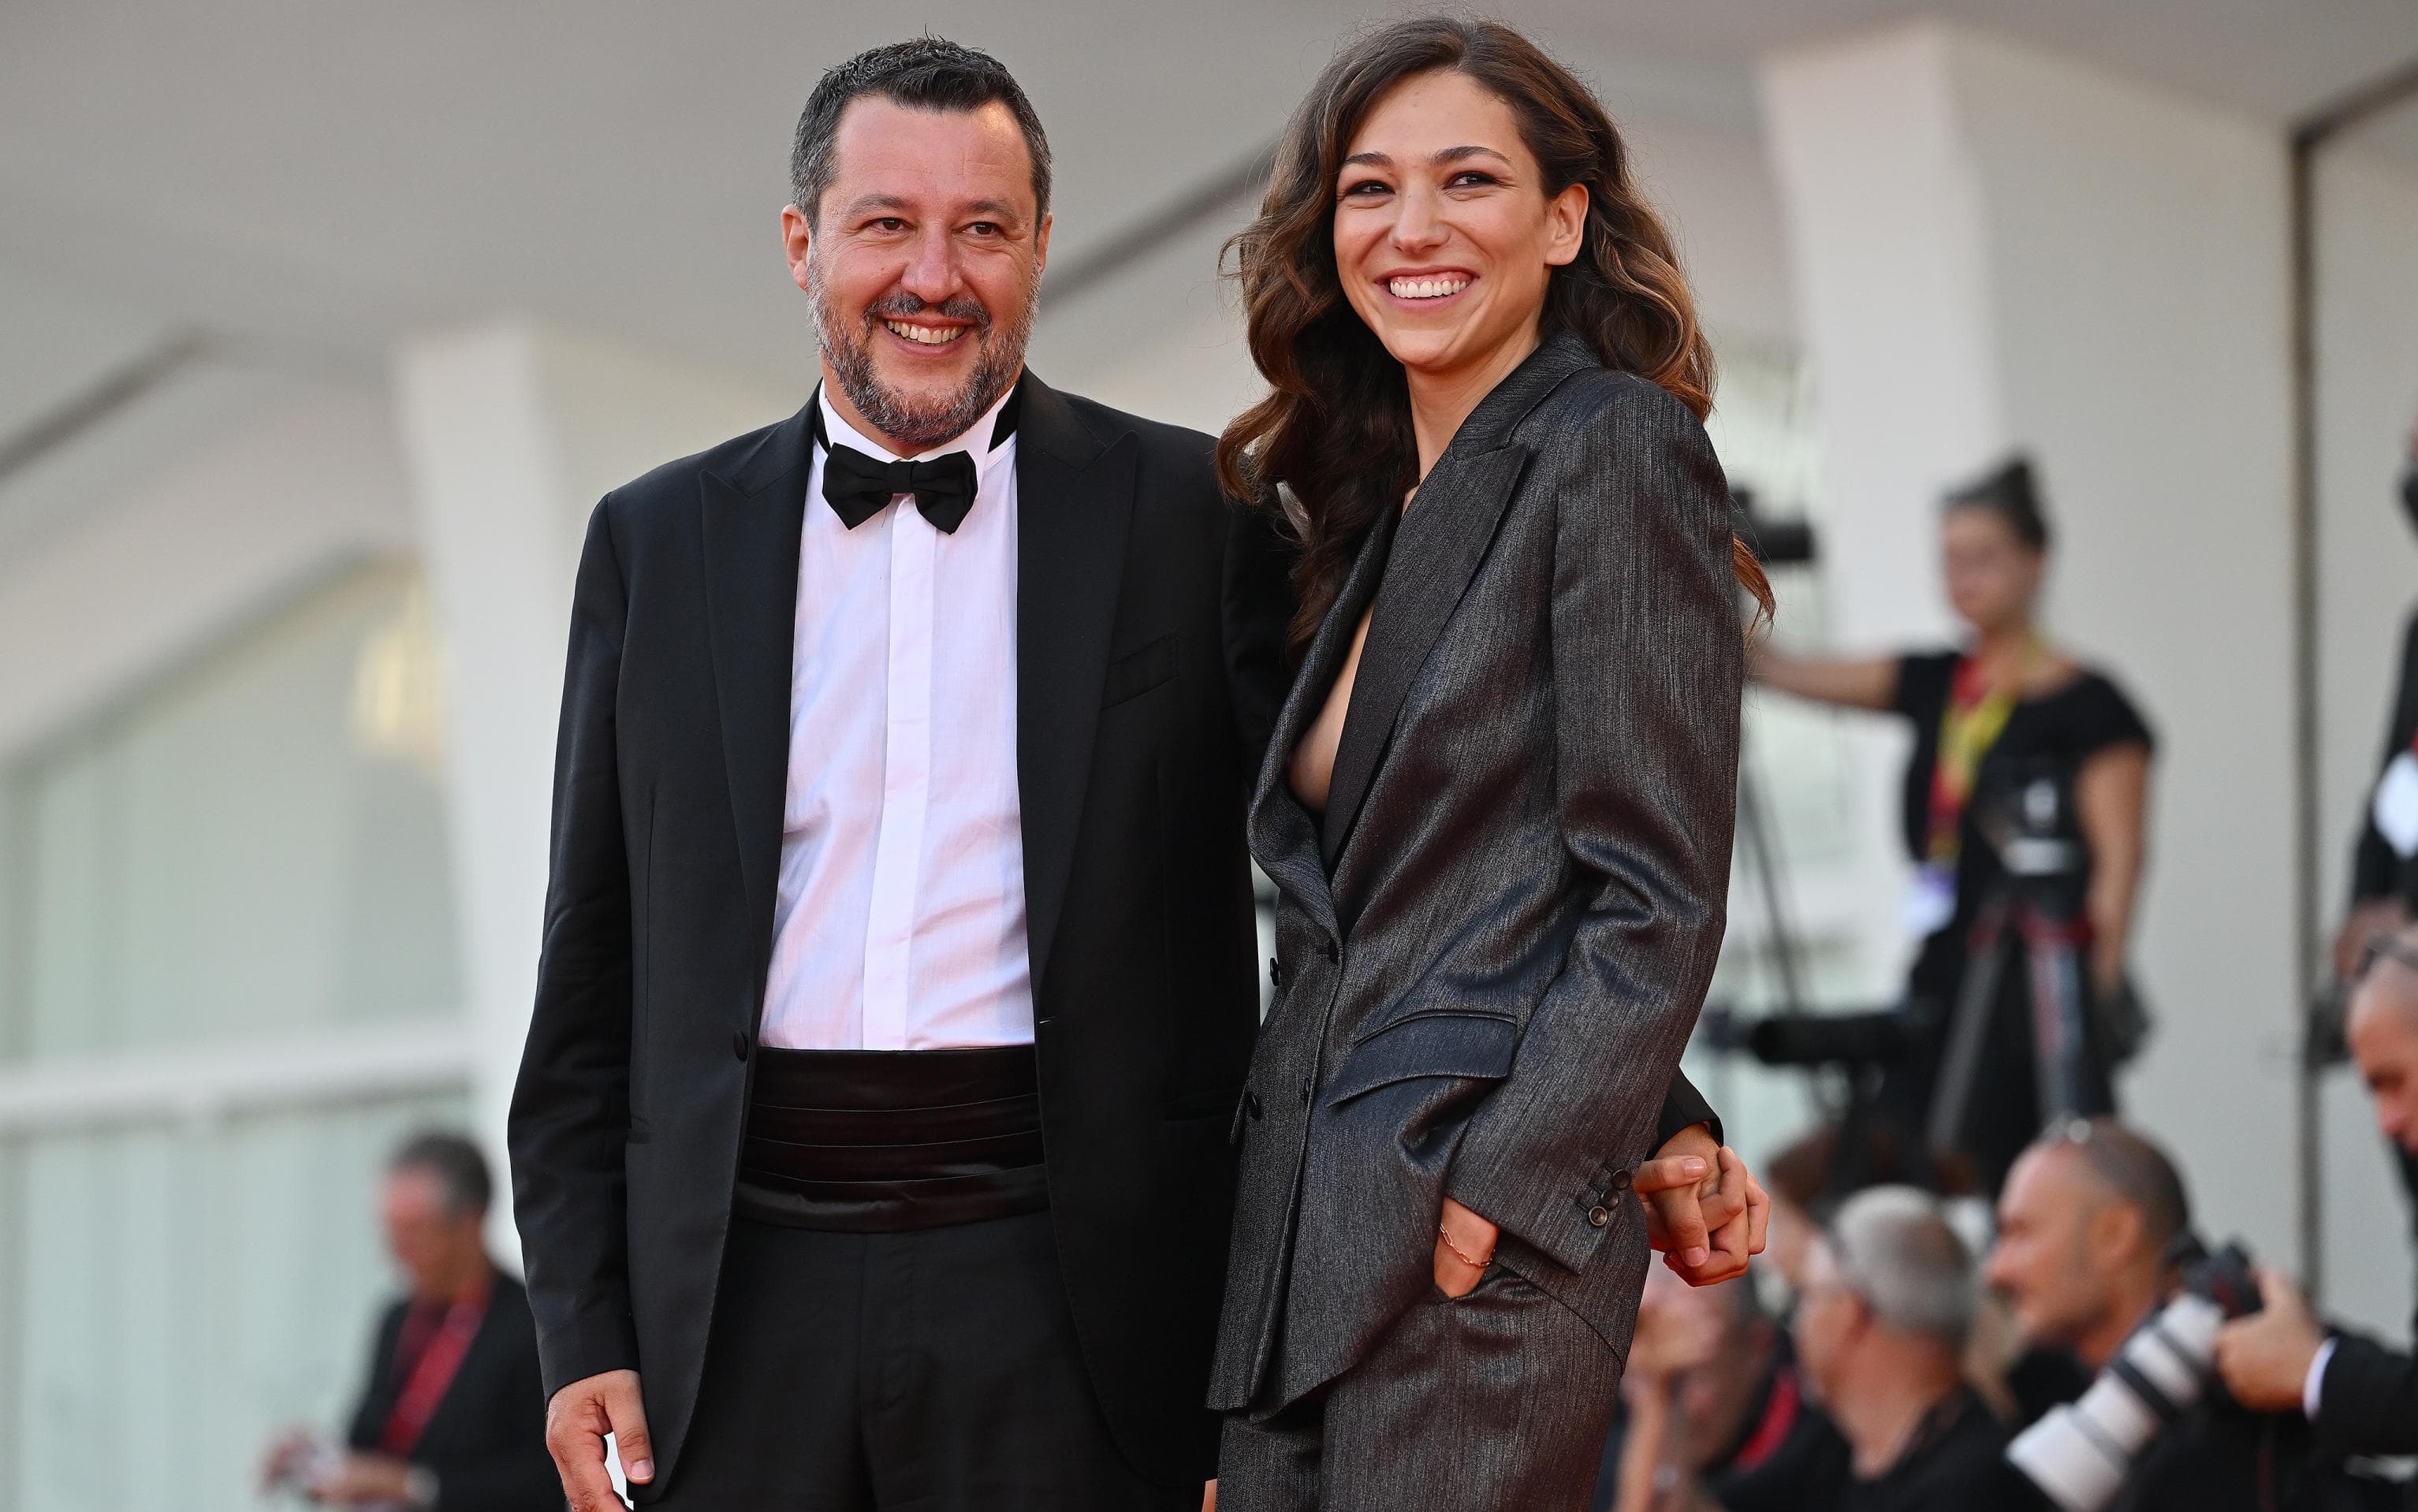 Italy's Lega nord party leader Matteo Salvini (L) and his fiance, Italian producer Francesca Verdini, arrive for the premiere of 'The Son' during the 79th Venice Film Festival in Venice, Italy, 07 September 2022. The movie is presented in official competition 'Venezia 79' at the festival running from 31 August to 10 September2022.  ANSA/ETTORE FERRARI
